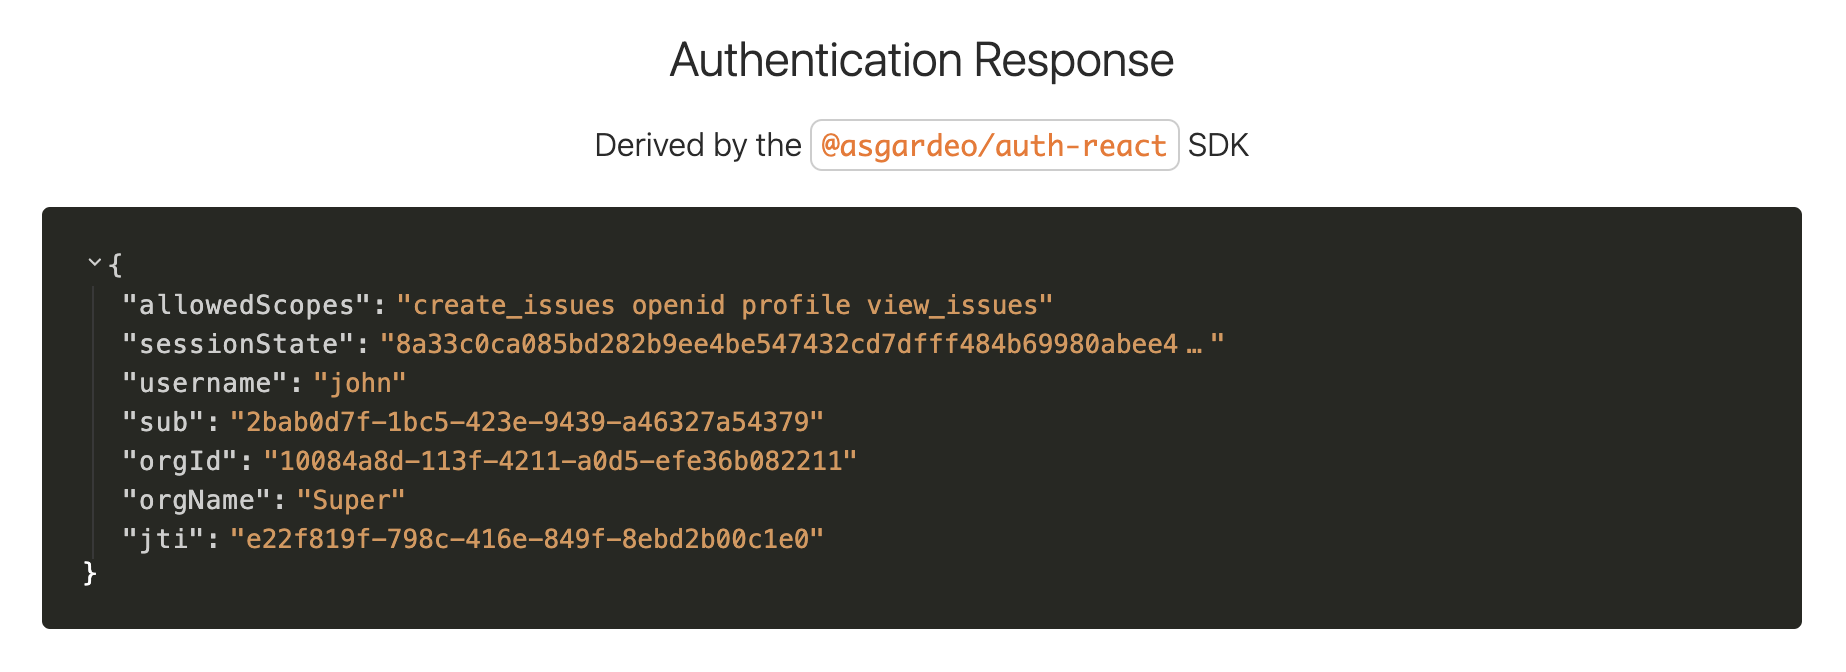 Authentication response of the developer group user